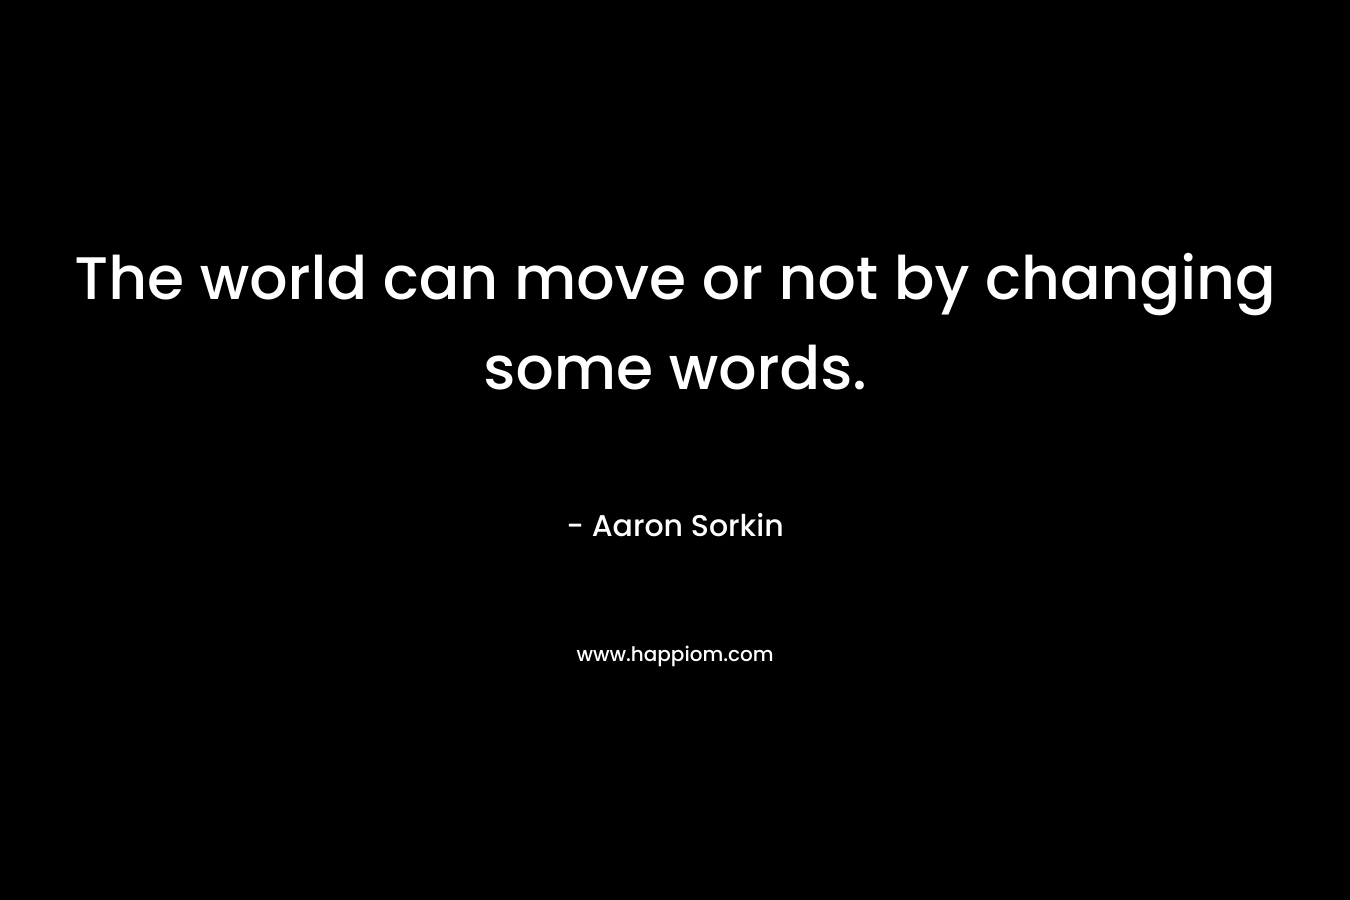 The world can move or not by changing some words. – Aaron Sorkin